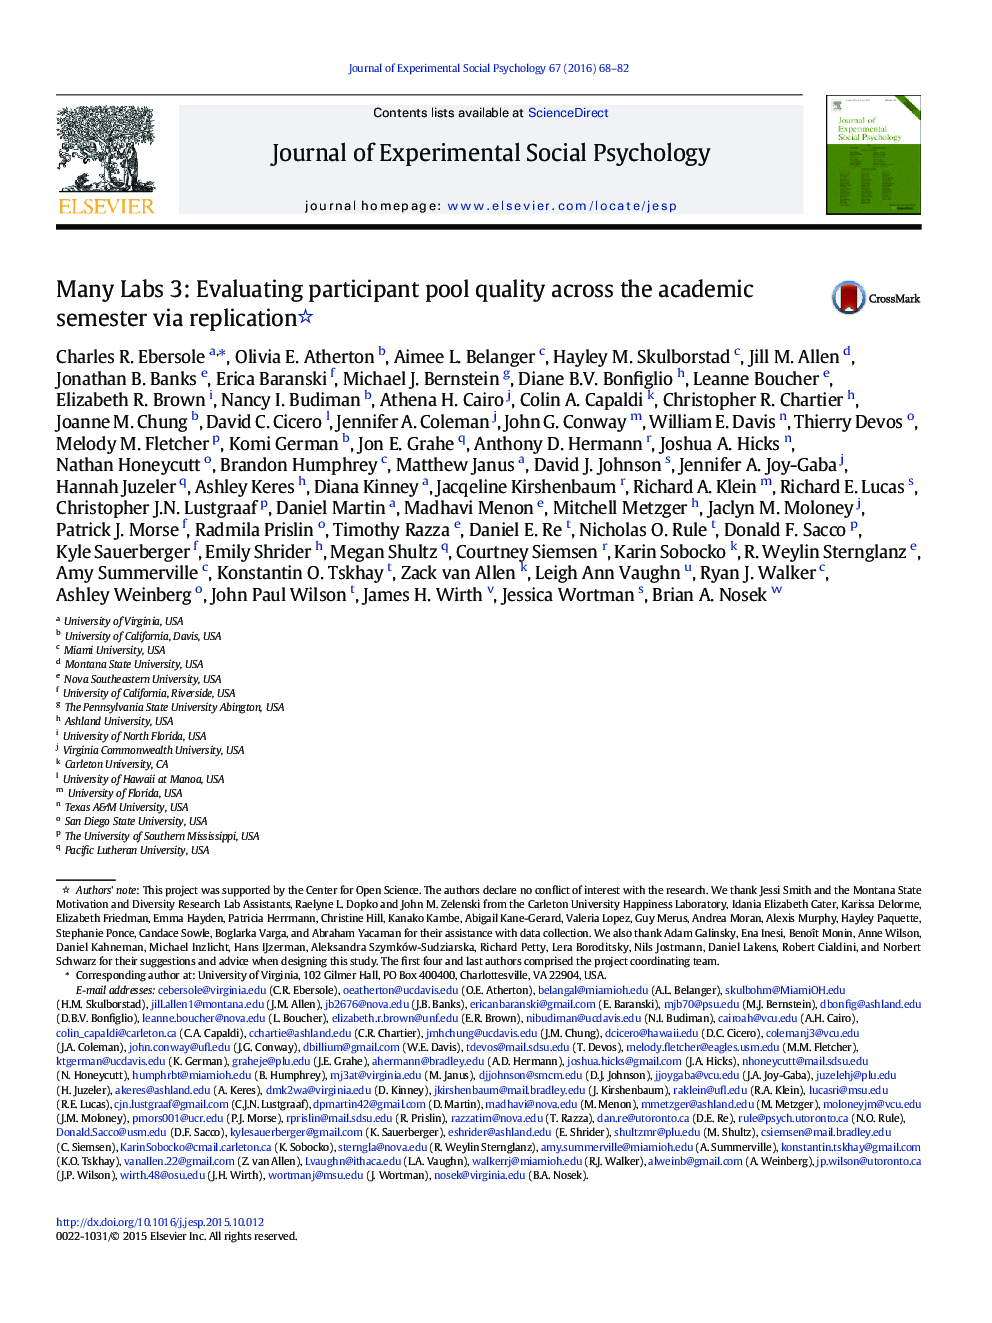 Many Labs 3: Evaluating participant pool quality across the academic semester via replication